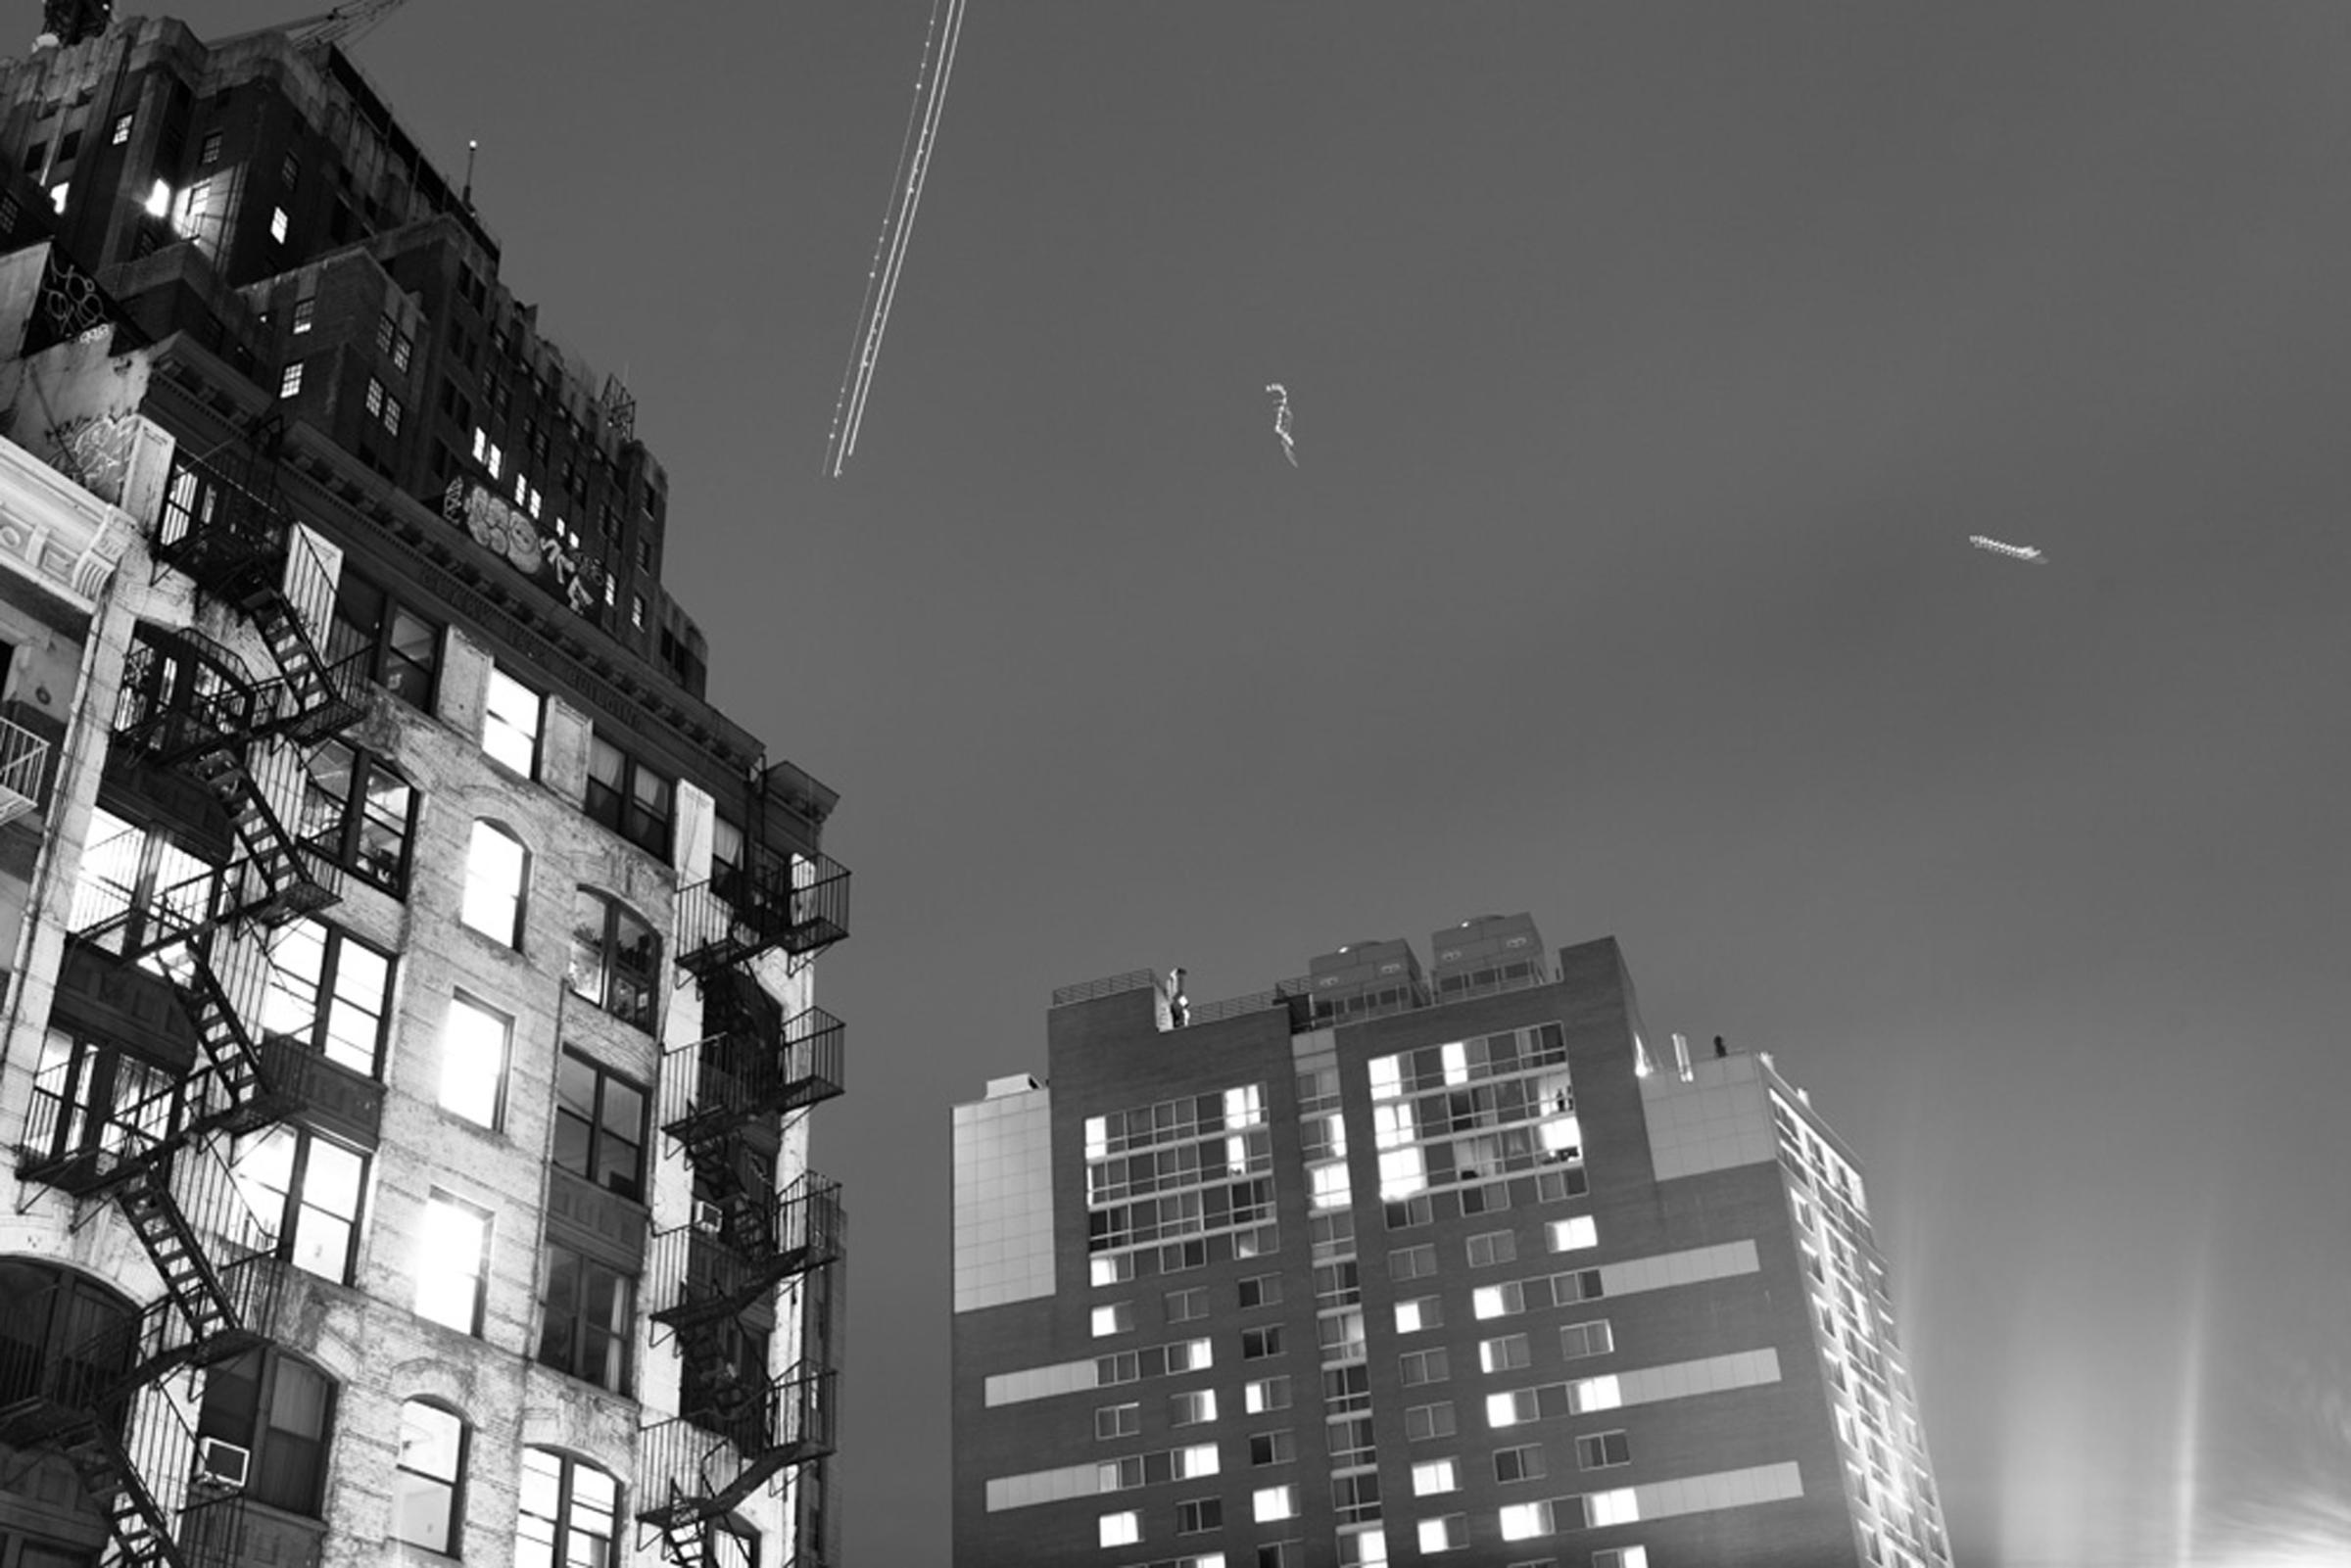 NYPD helicopters in the sky above downtown Manhattan on Dec. 4, 2014.